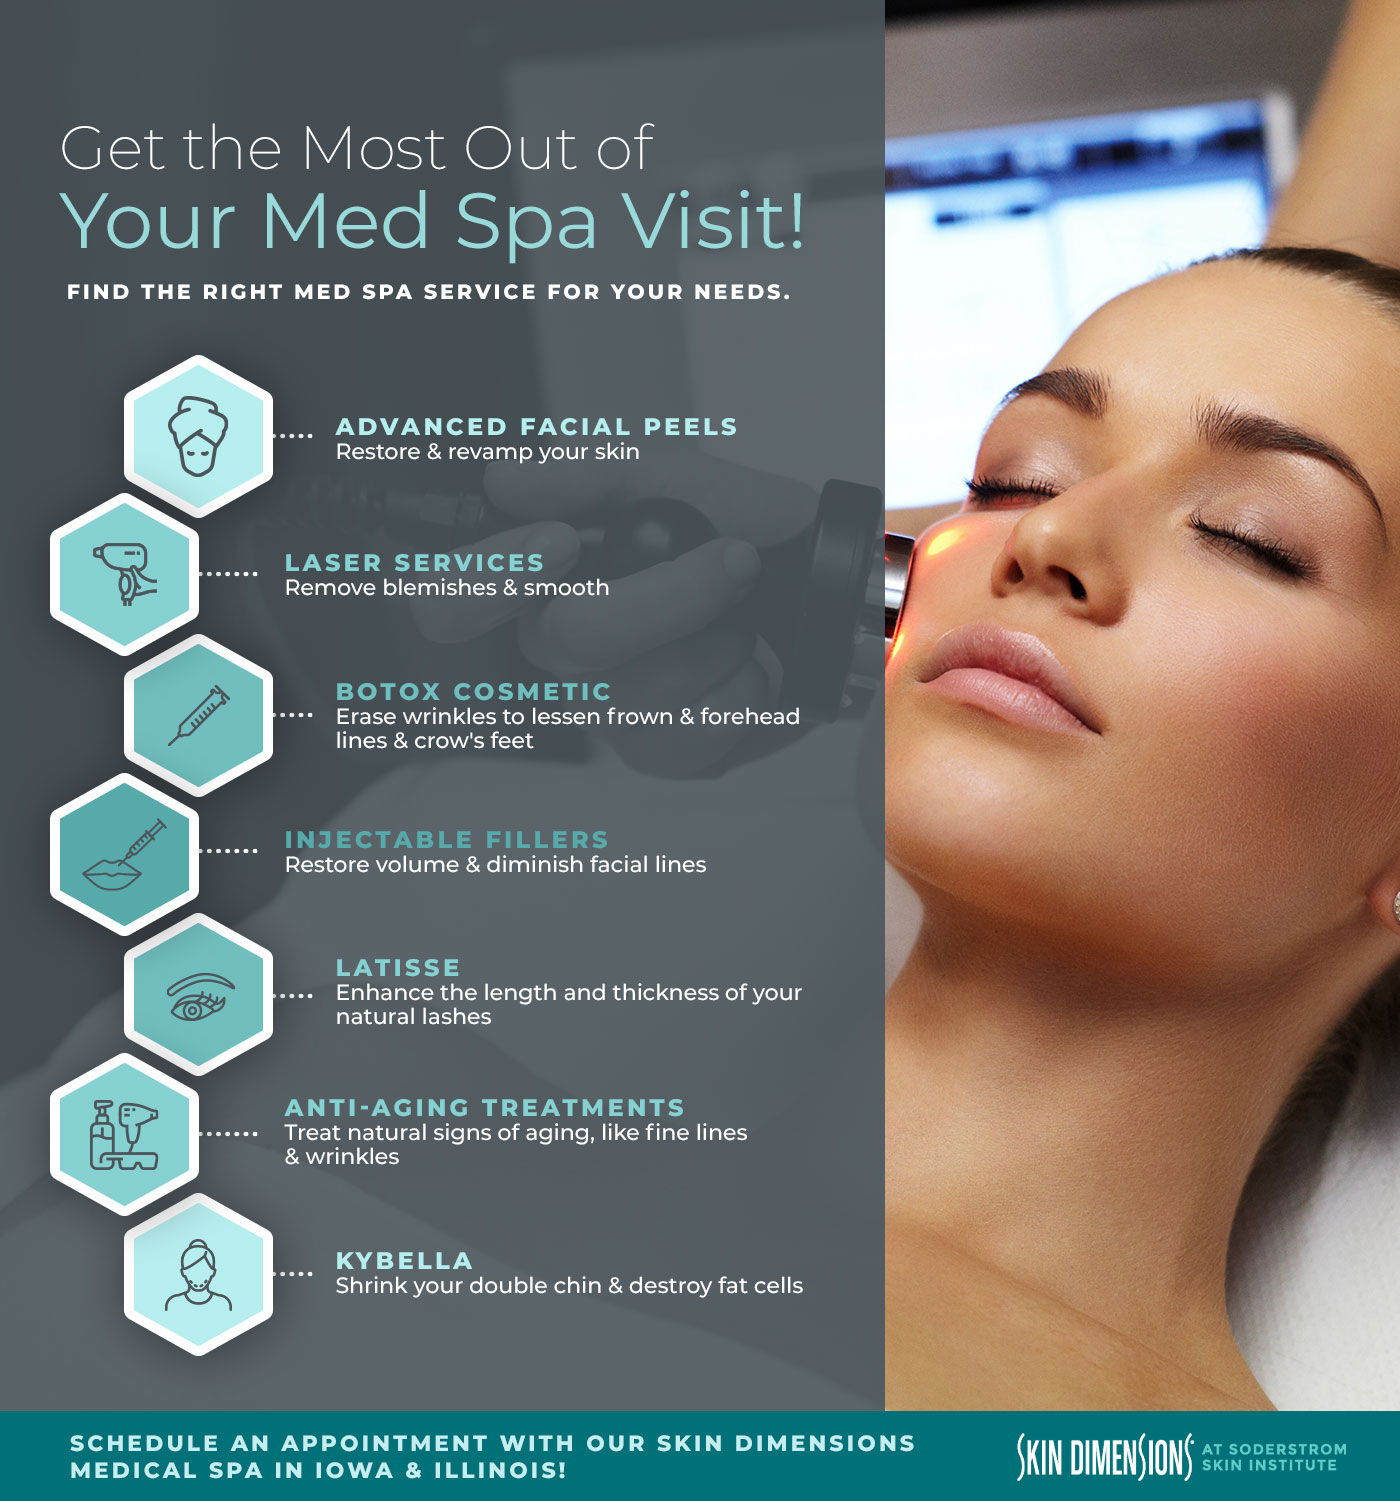 Skinceuticals Langley